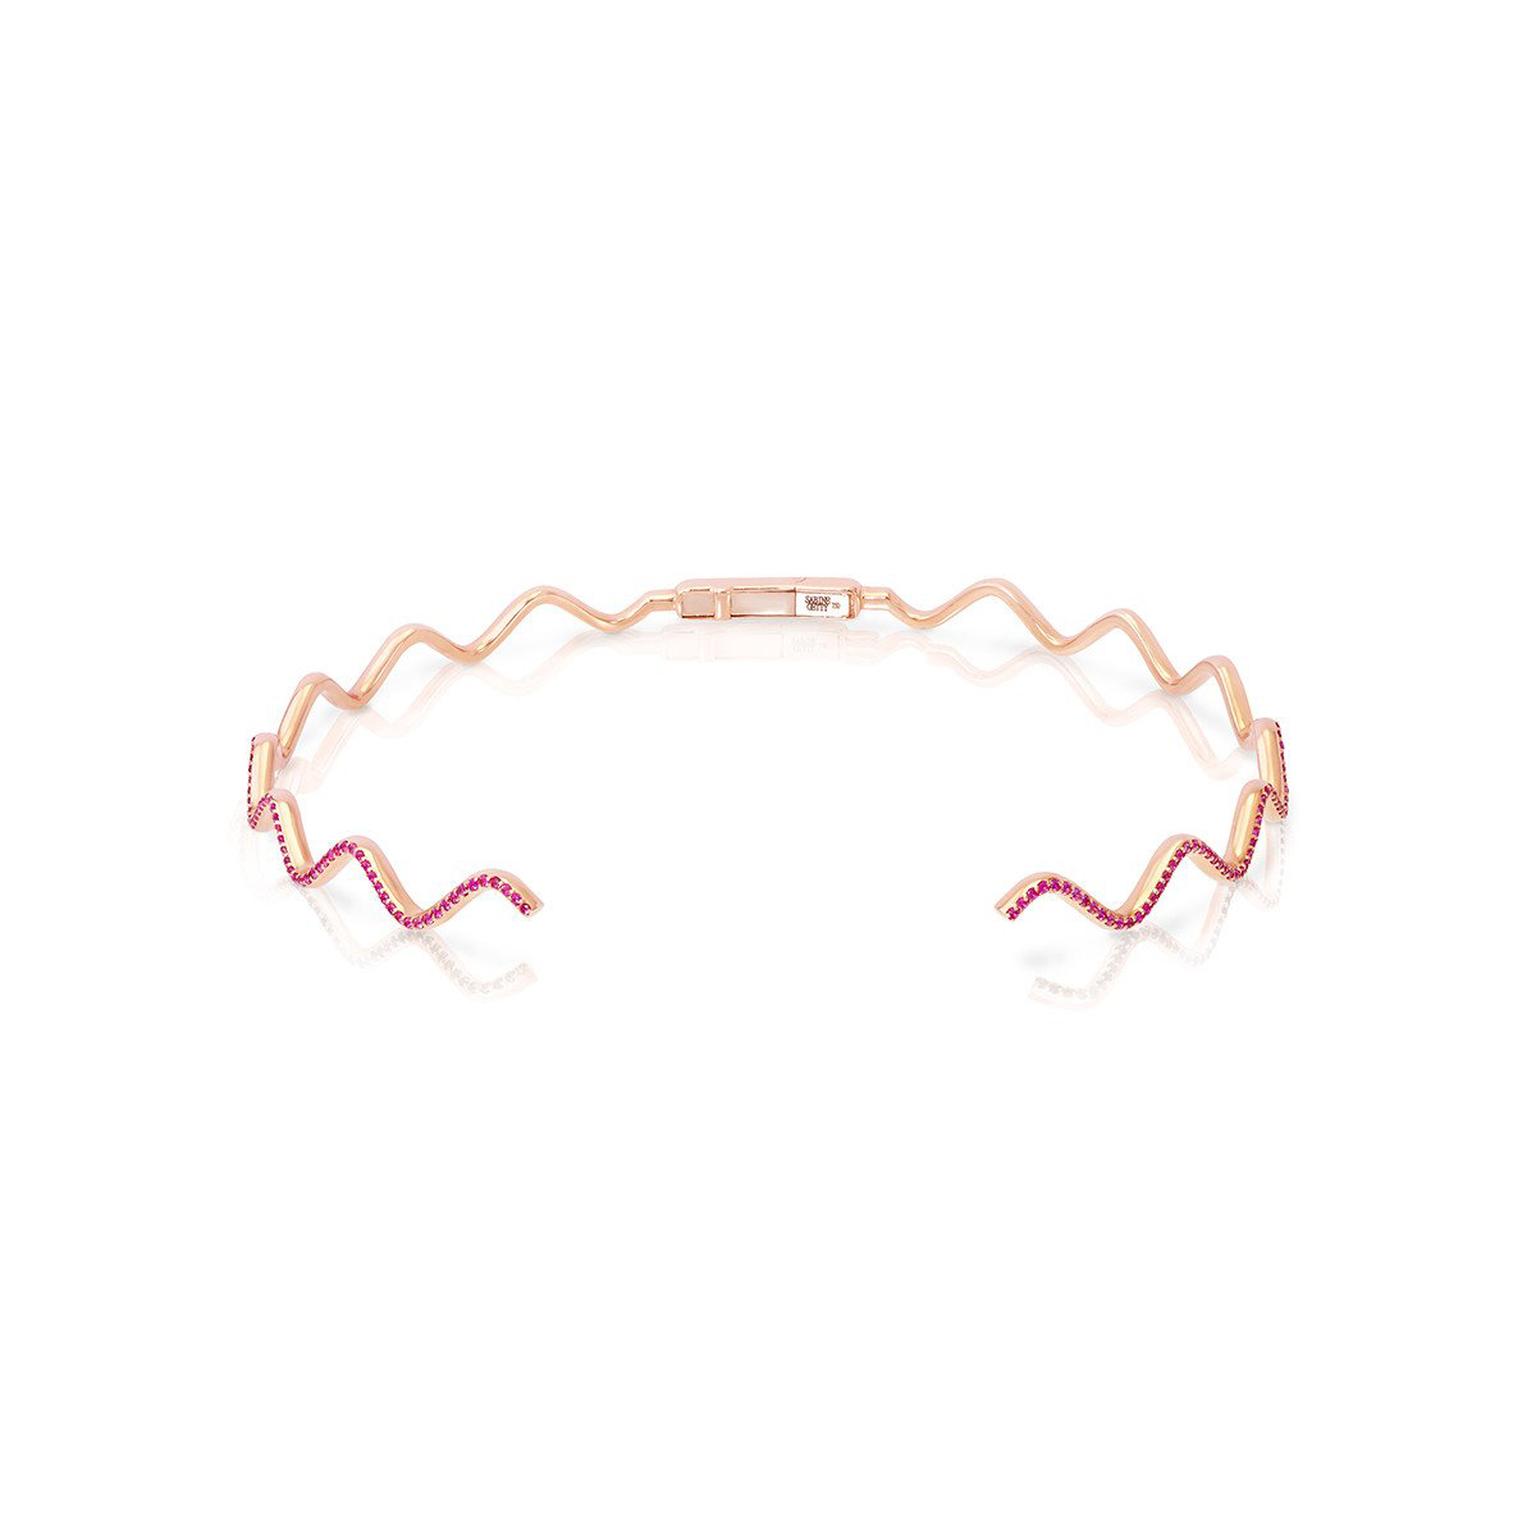 Sabine Getty Baby Memphis pink sapphire Wave choker in pink gold